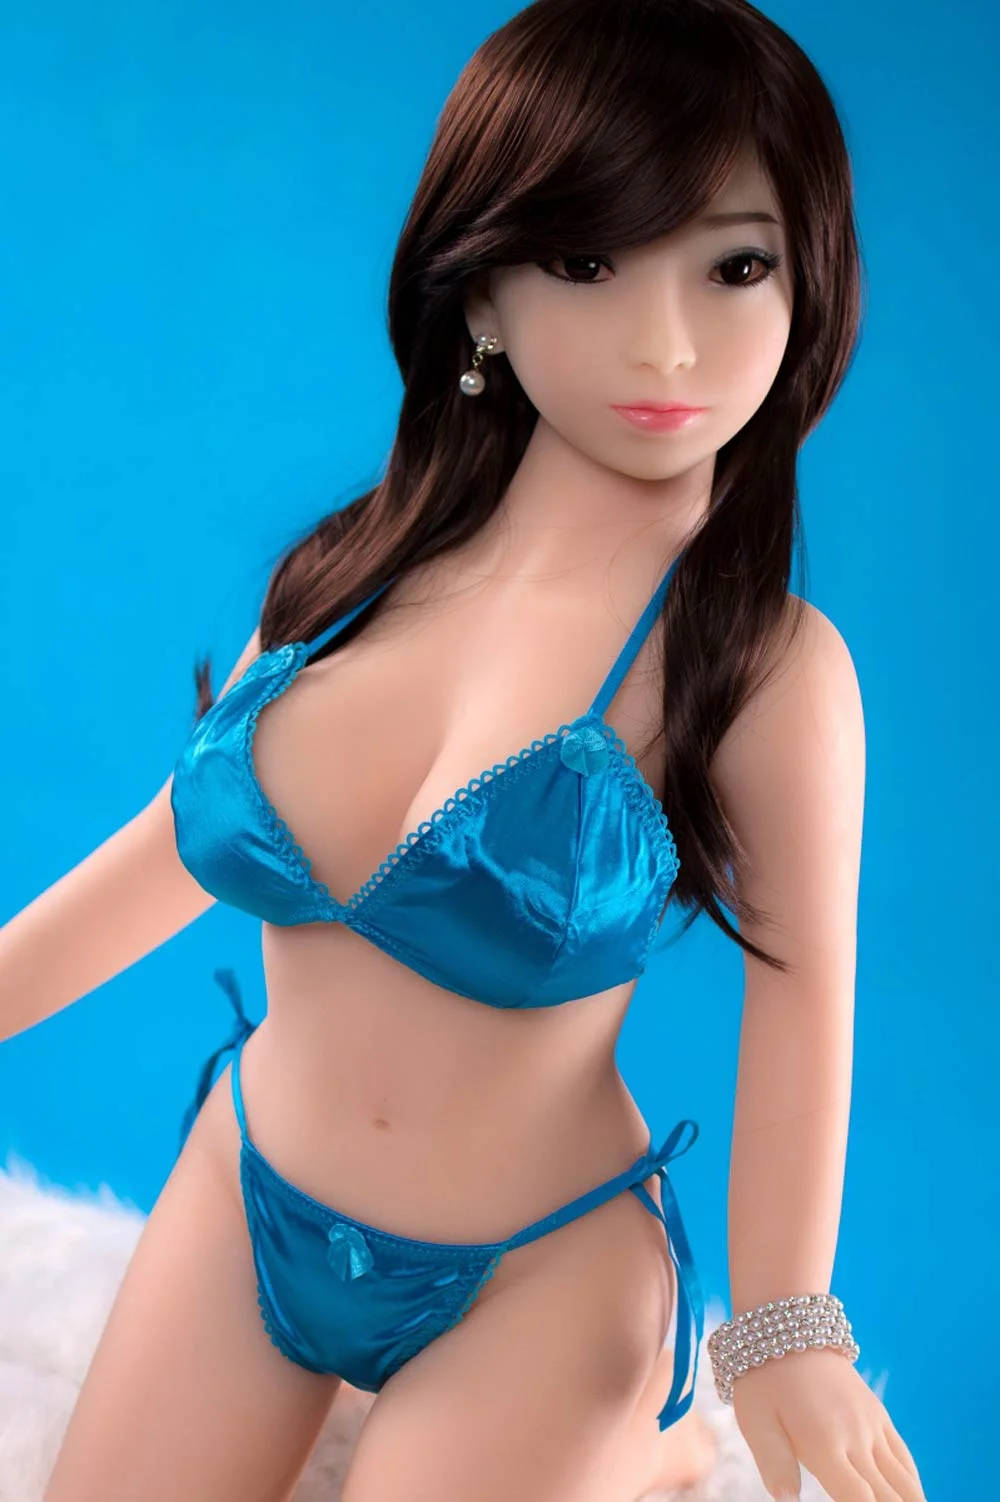 Sex doll with pearl necklace in hand